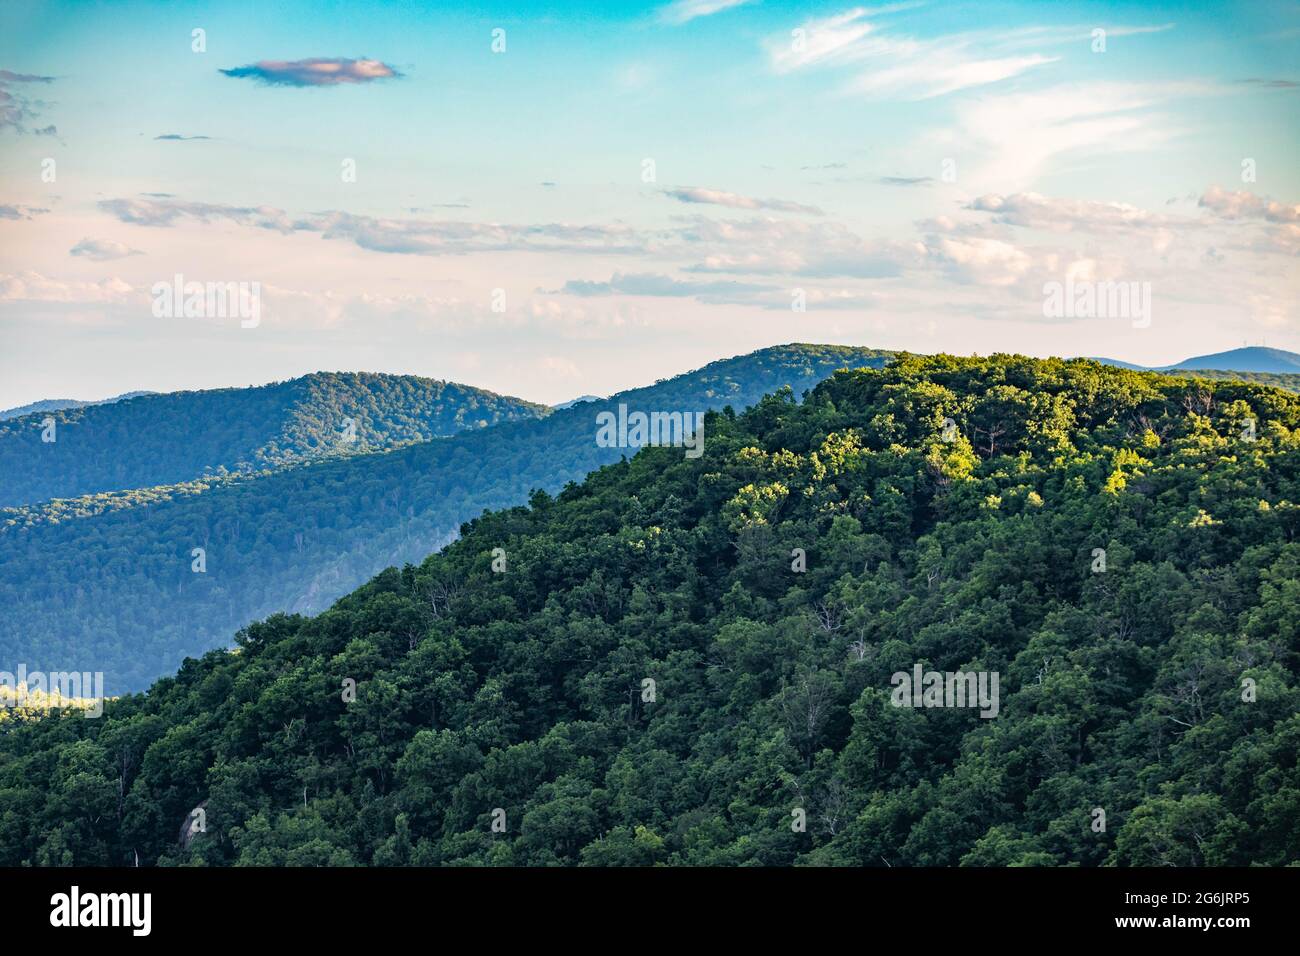 Scenic overlook of Shenandoah blue ridge mountains and hills close up at sunset Stock Photo